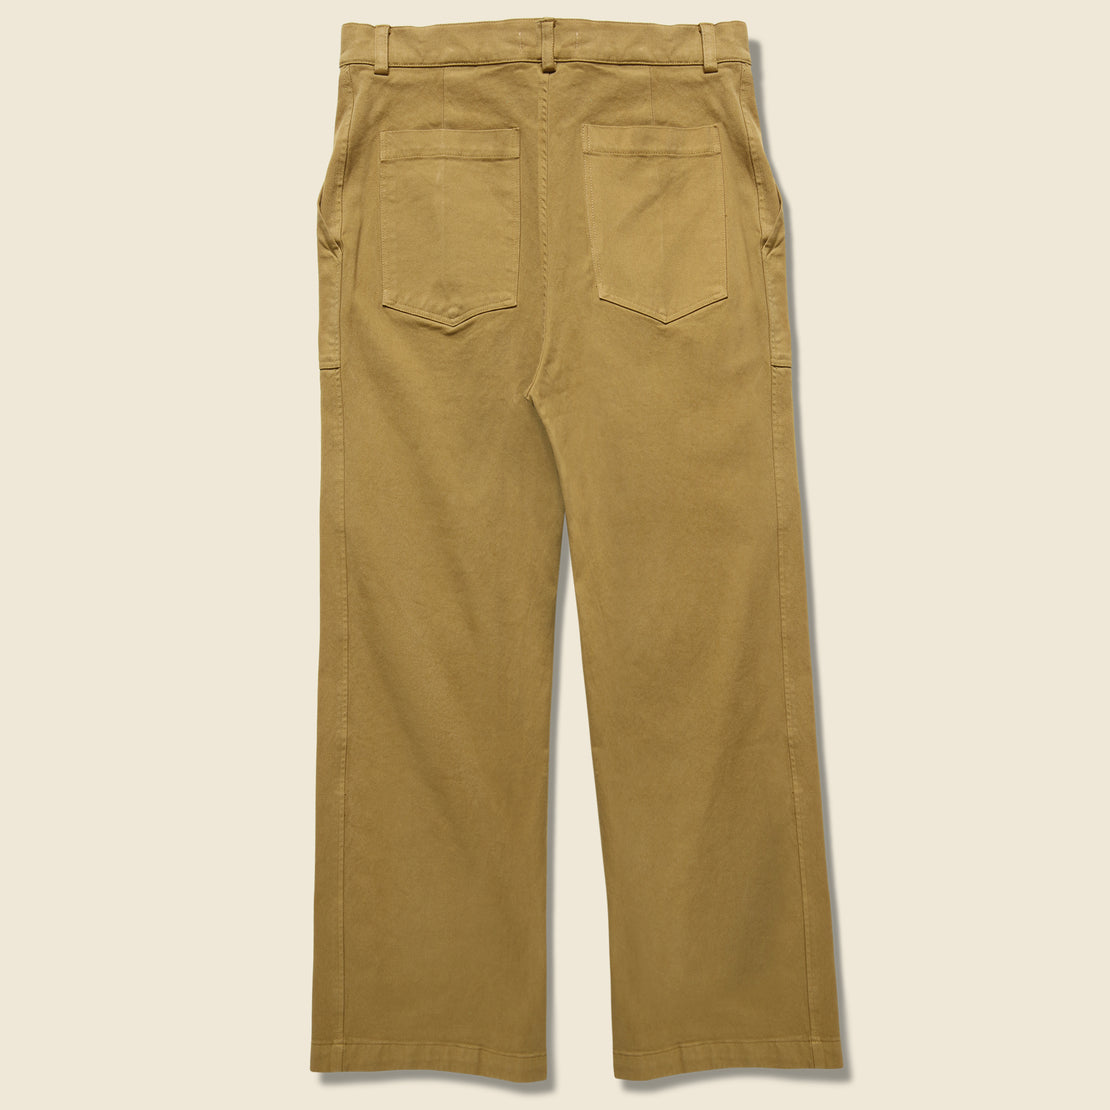 Cargo Trouser - Washed Caramel - First Rite - STAG Provisions - W - Pants - Twill